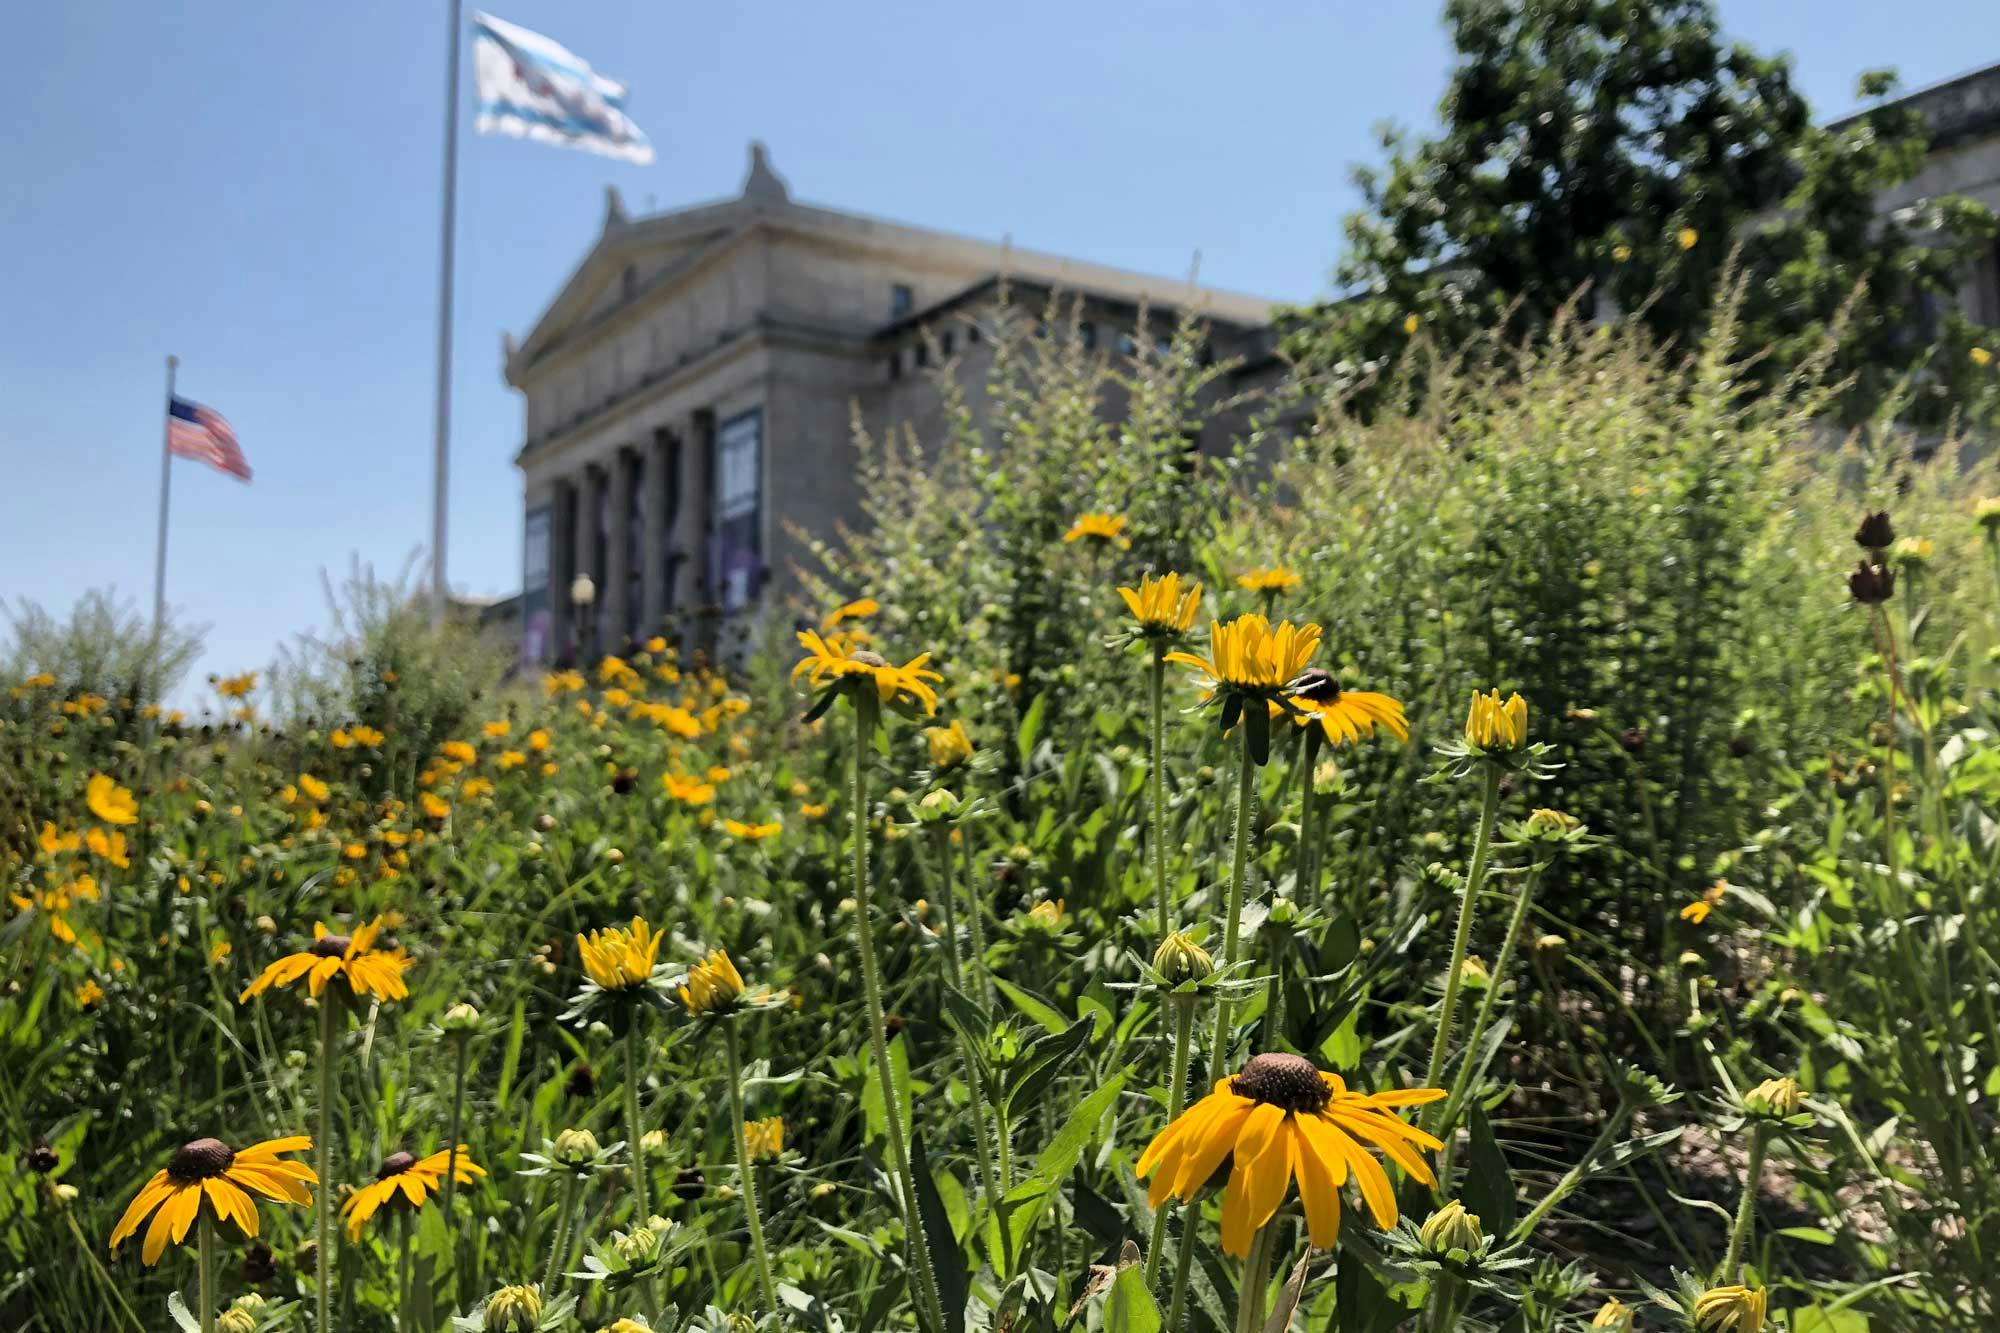 Black-eyed Susans in the foreground with the North side of the Field Museum in the background.